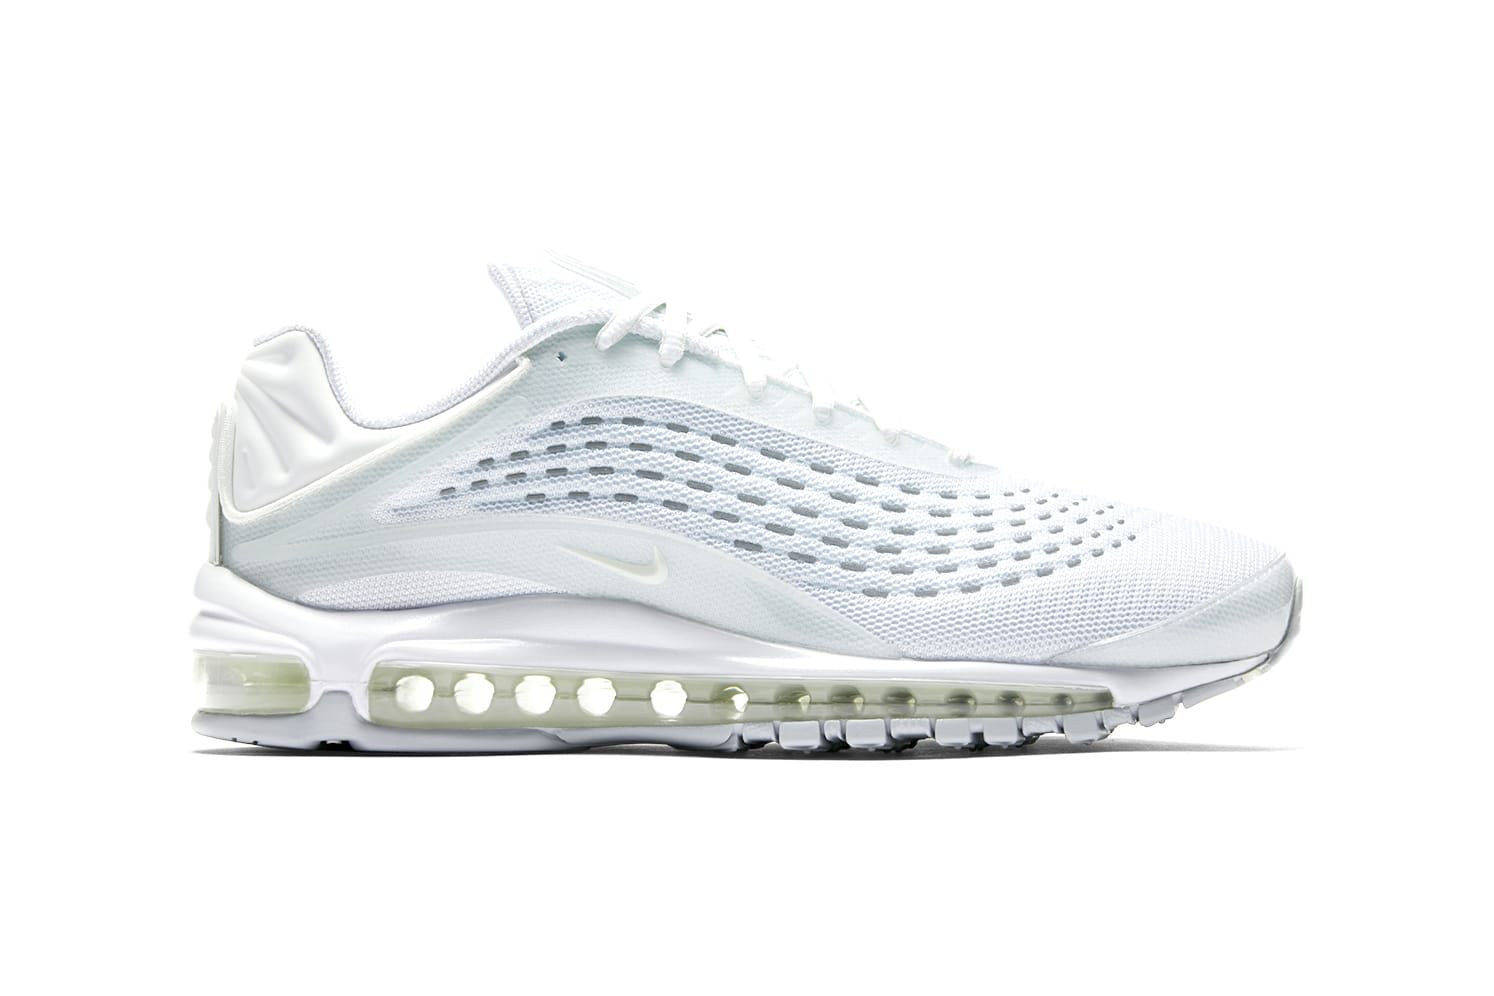 Nike Air Max Deluxe in Triple White 